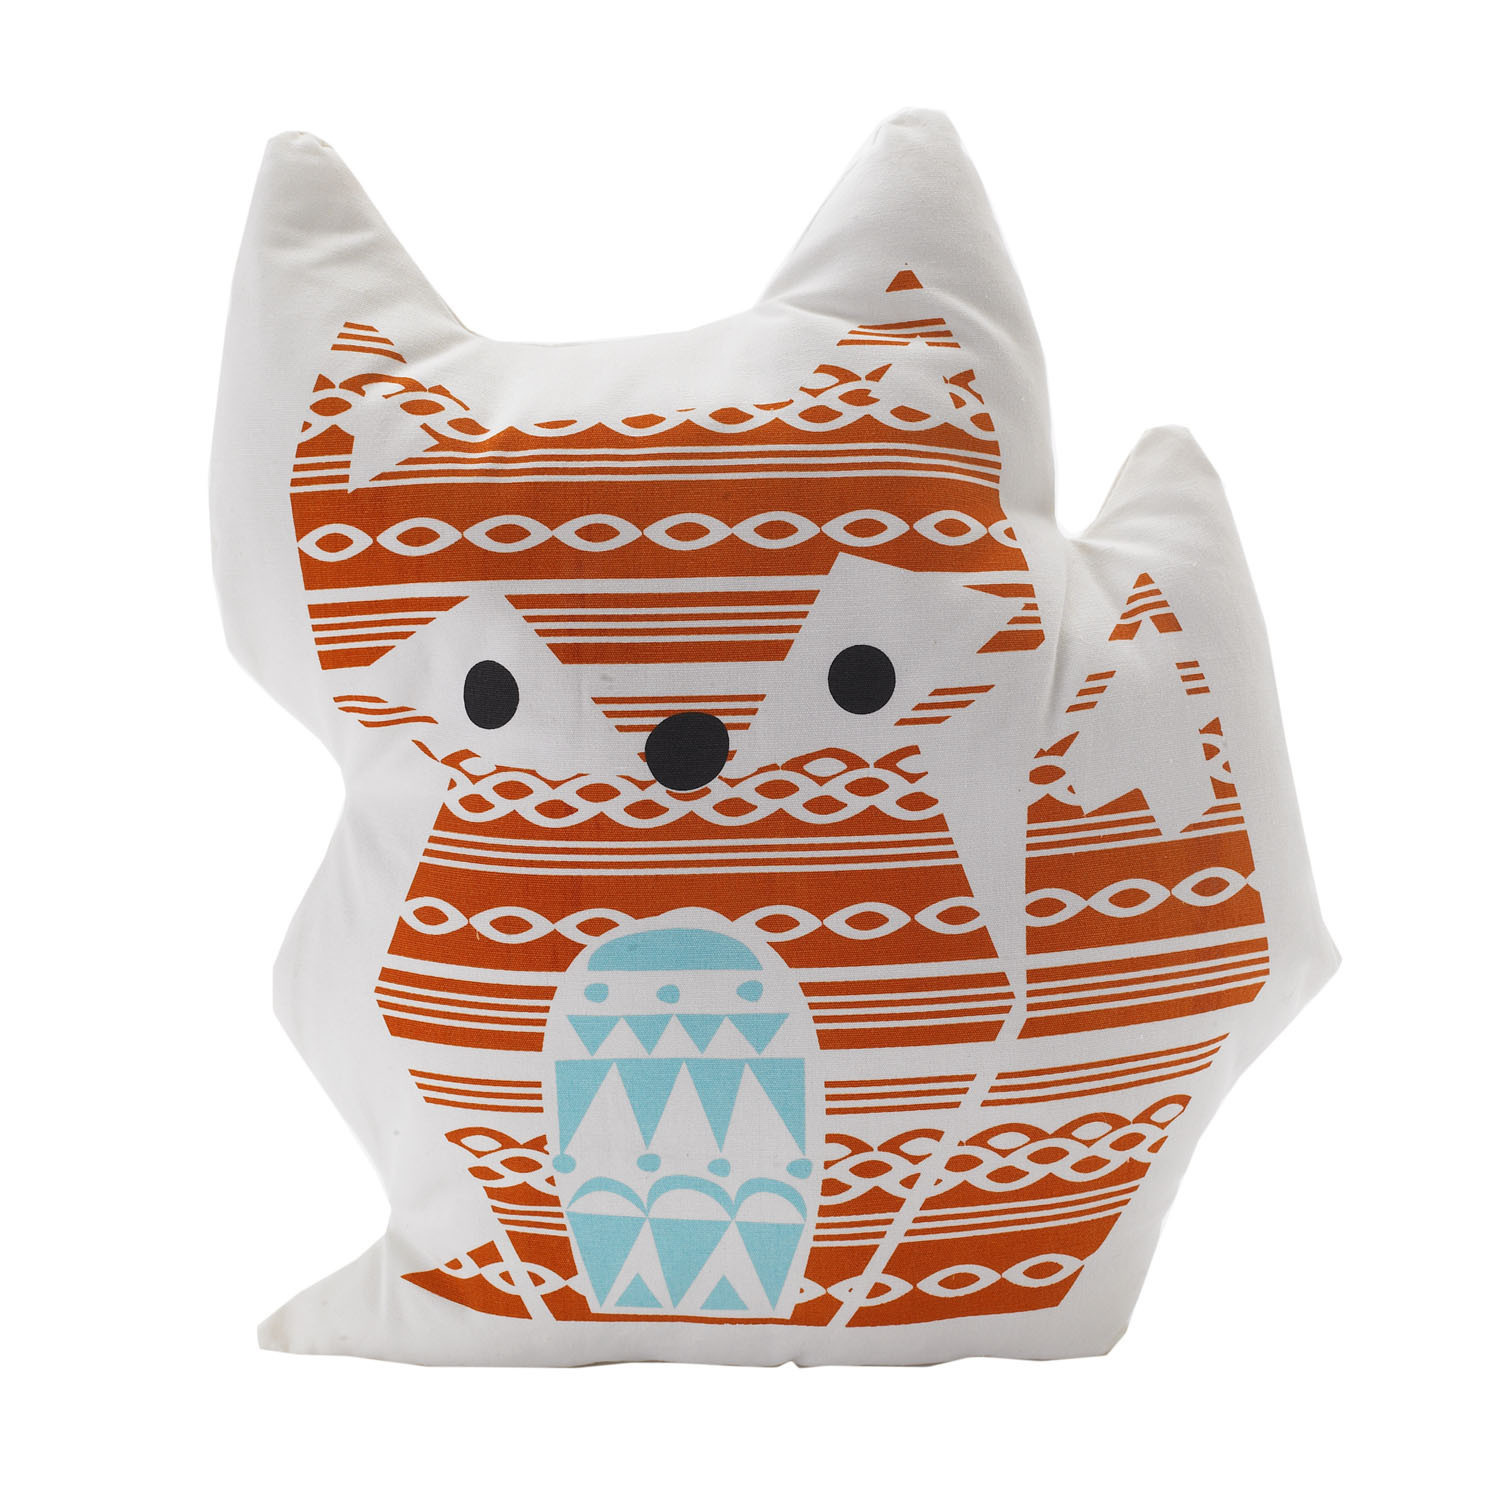 Lolli Living Lolli Living Knitted character cushion - Fox/Woods